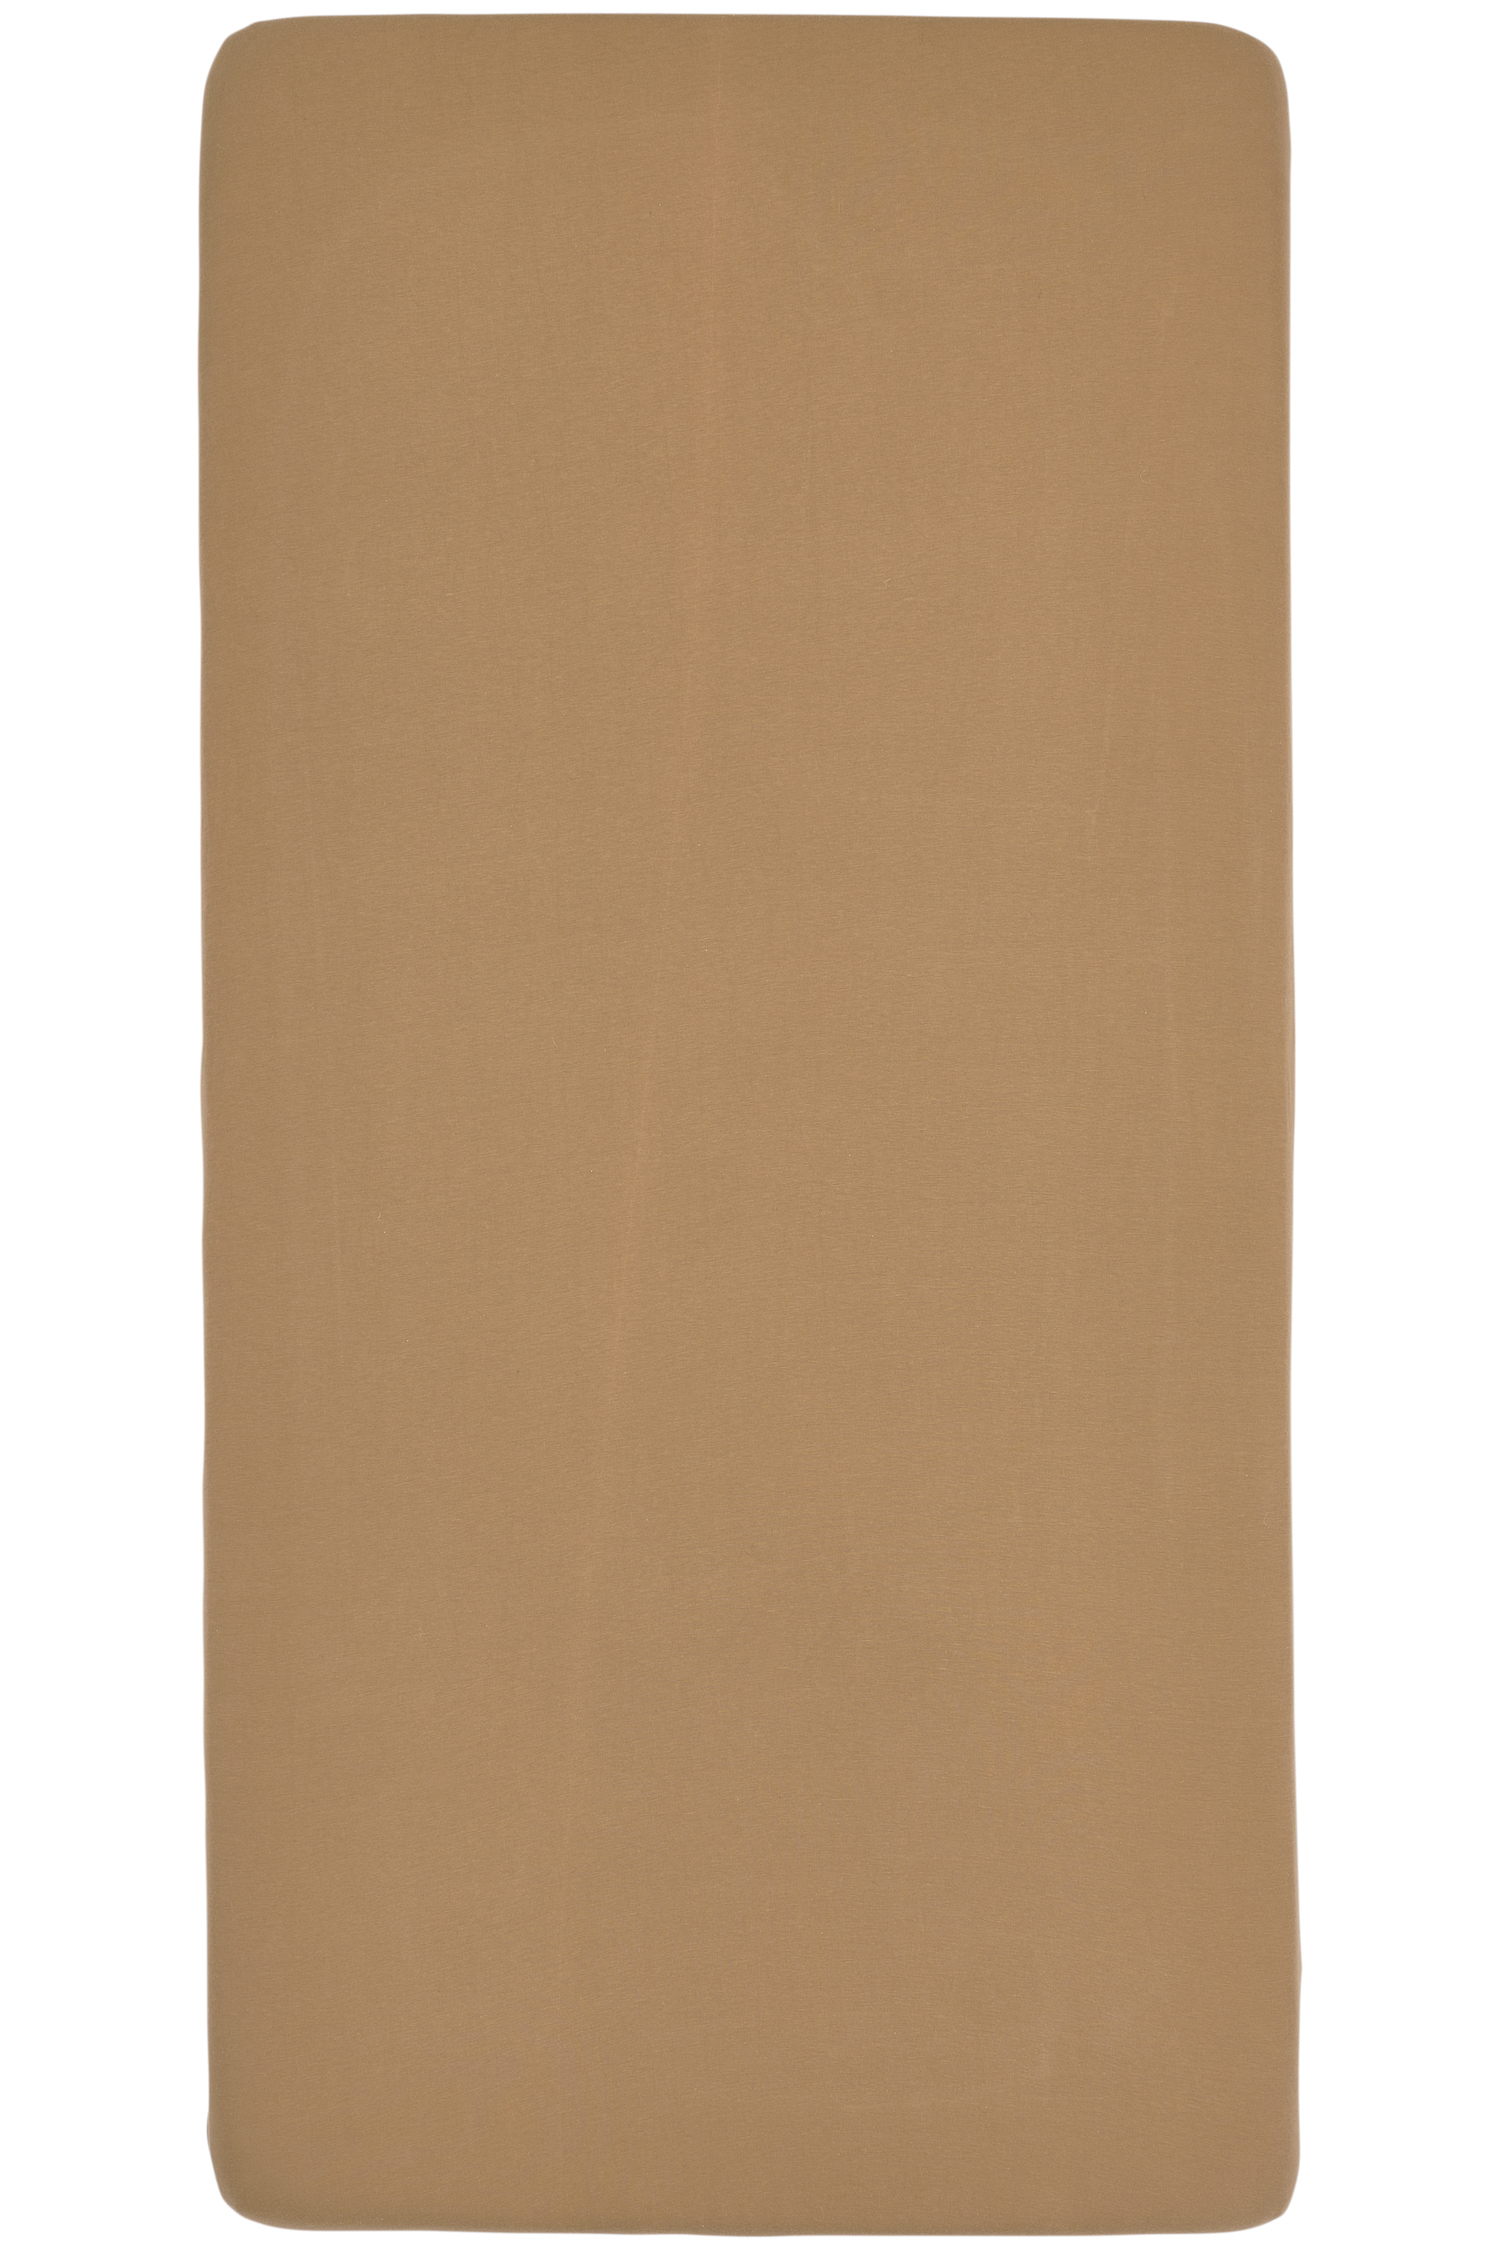 Fitted sheet 1-Pers. Uni - toffee - 90x200cm